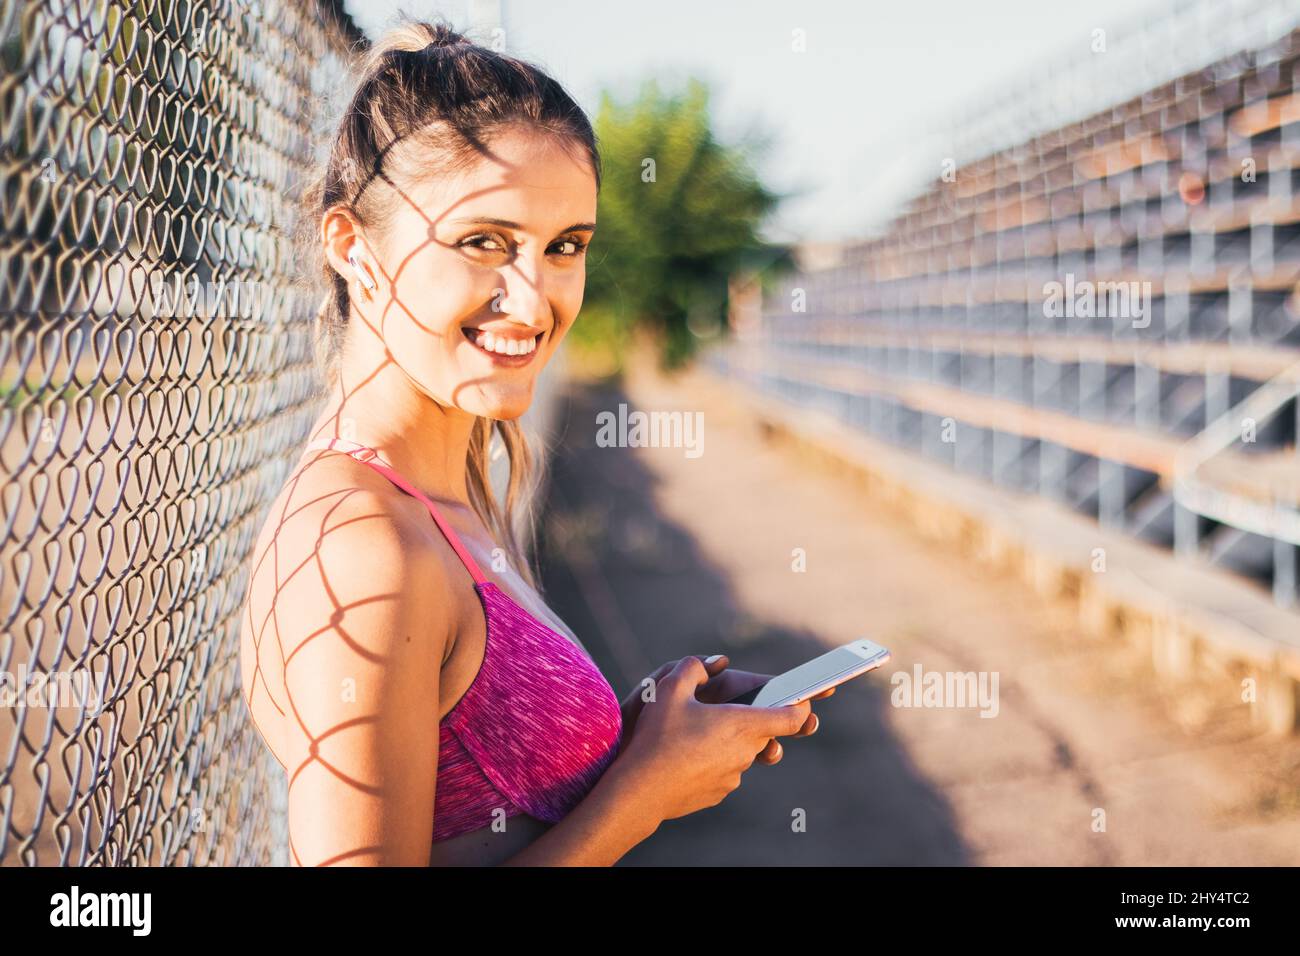 Smiling caucasian young active woman looking at the camera and setting a music playlist on her smartphone Stock Photo